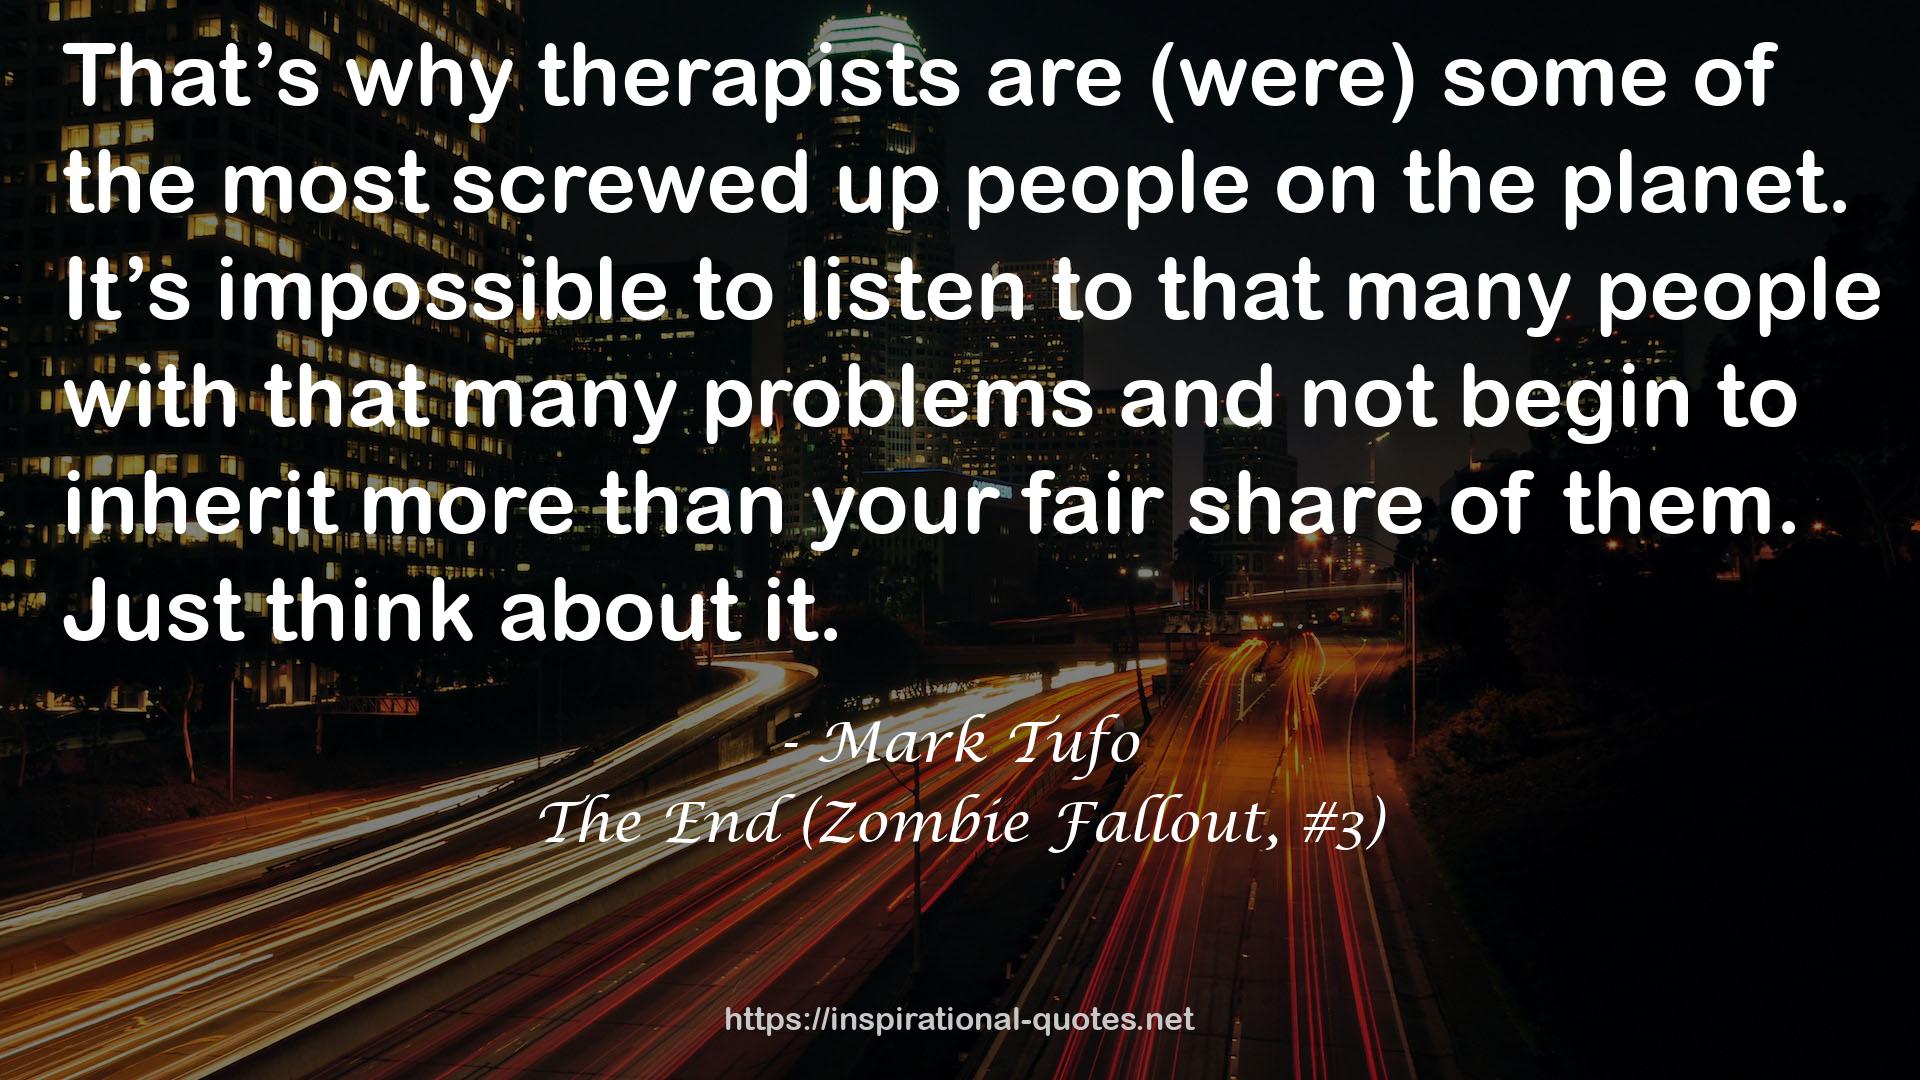 The End (Zombie Fallout, #3) QUOTES